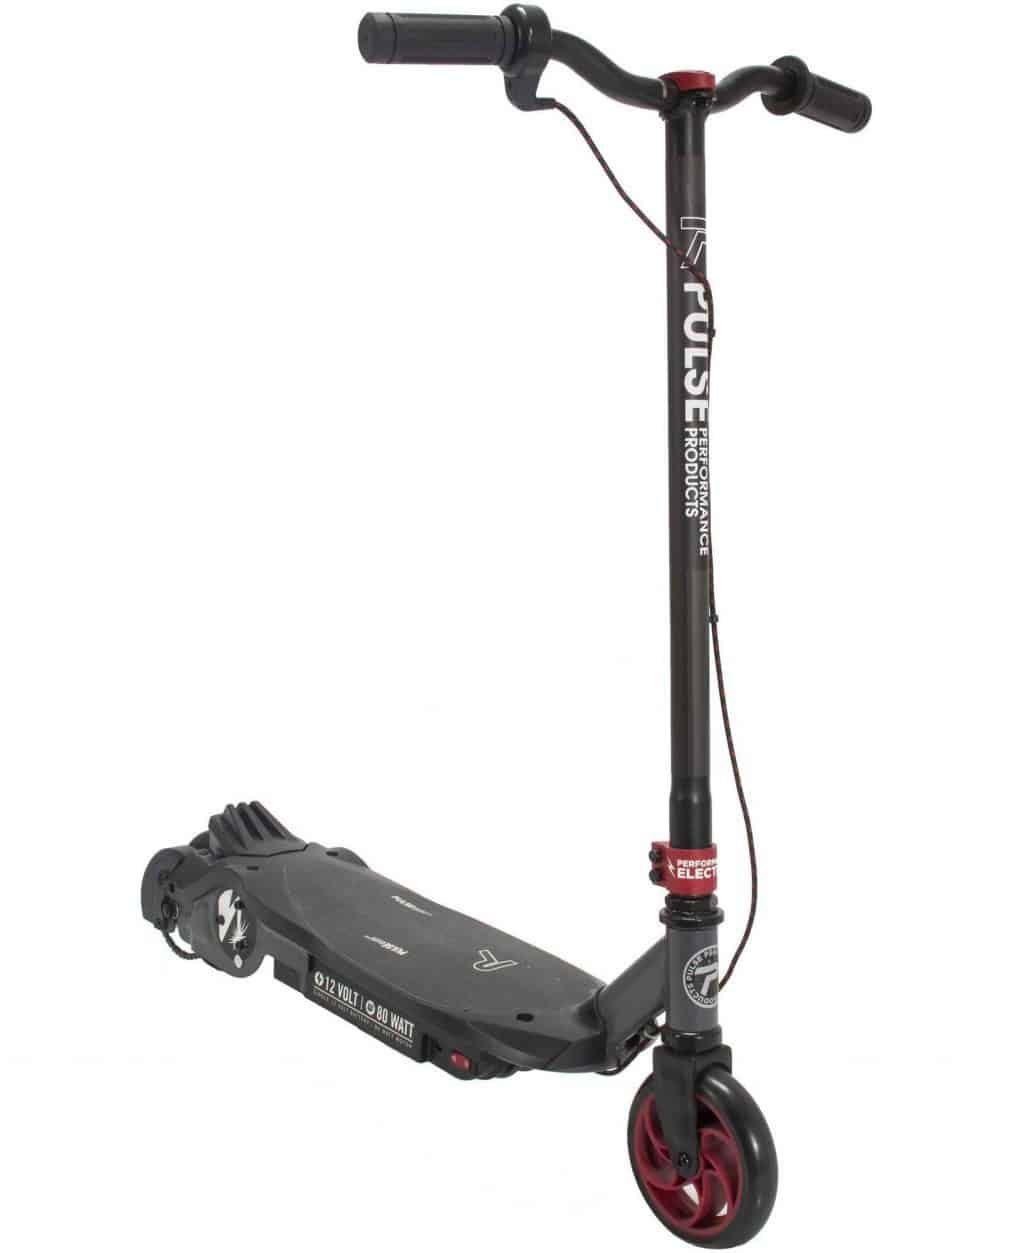 Pulse Performance Products GRT-11 Electric Scooter